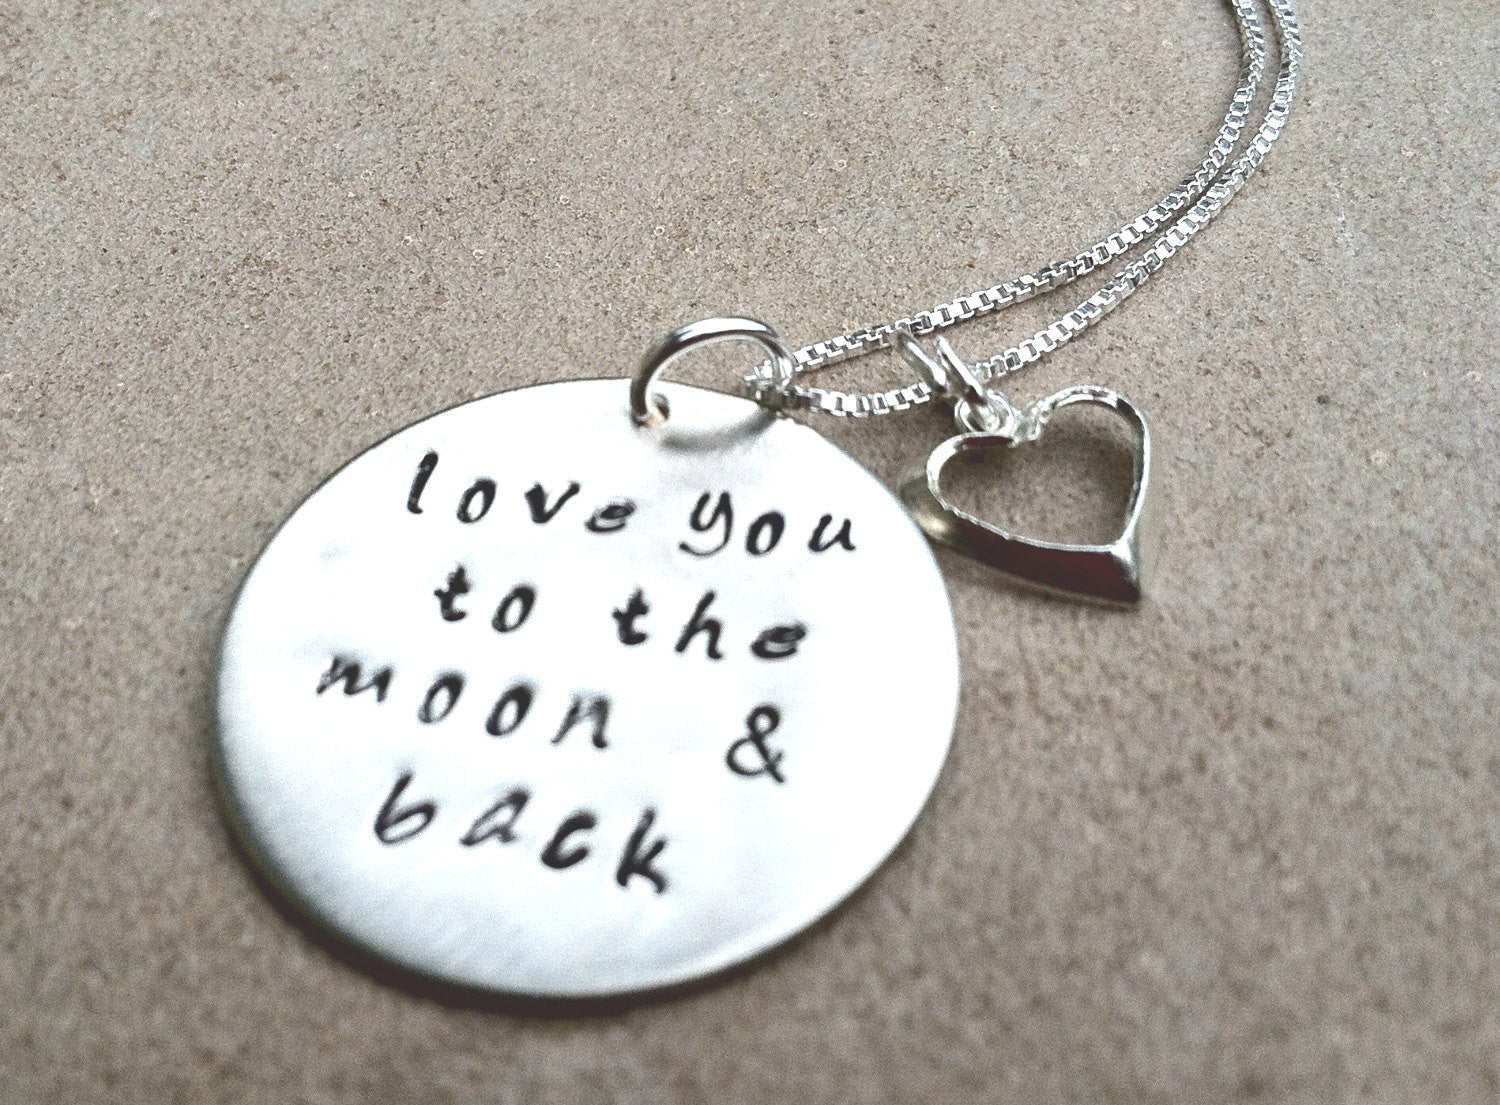 Mother Daughter Necklace, I Love You To The Moon And Back Jewelry, Daughter Necklace, Natashaaloha, Personalized Hand Stamped Jewelry - Natashaaloha, jewelry, bracelets, necklace, keychains, fishing lures, gifts for men, charms, personalized, 